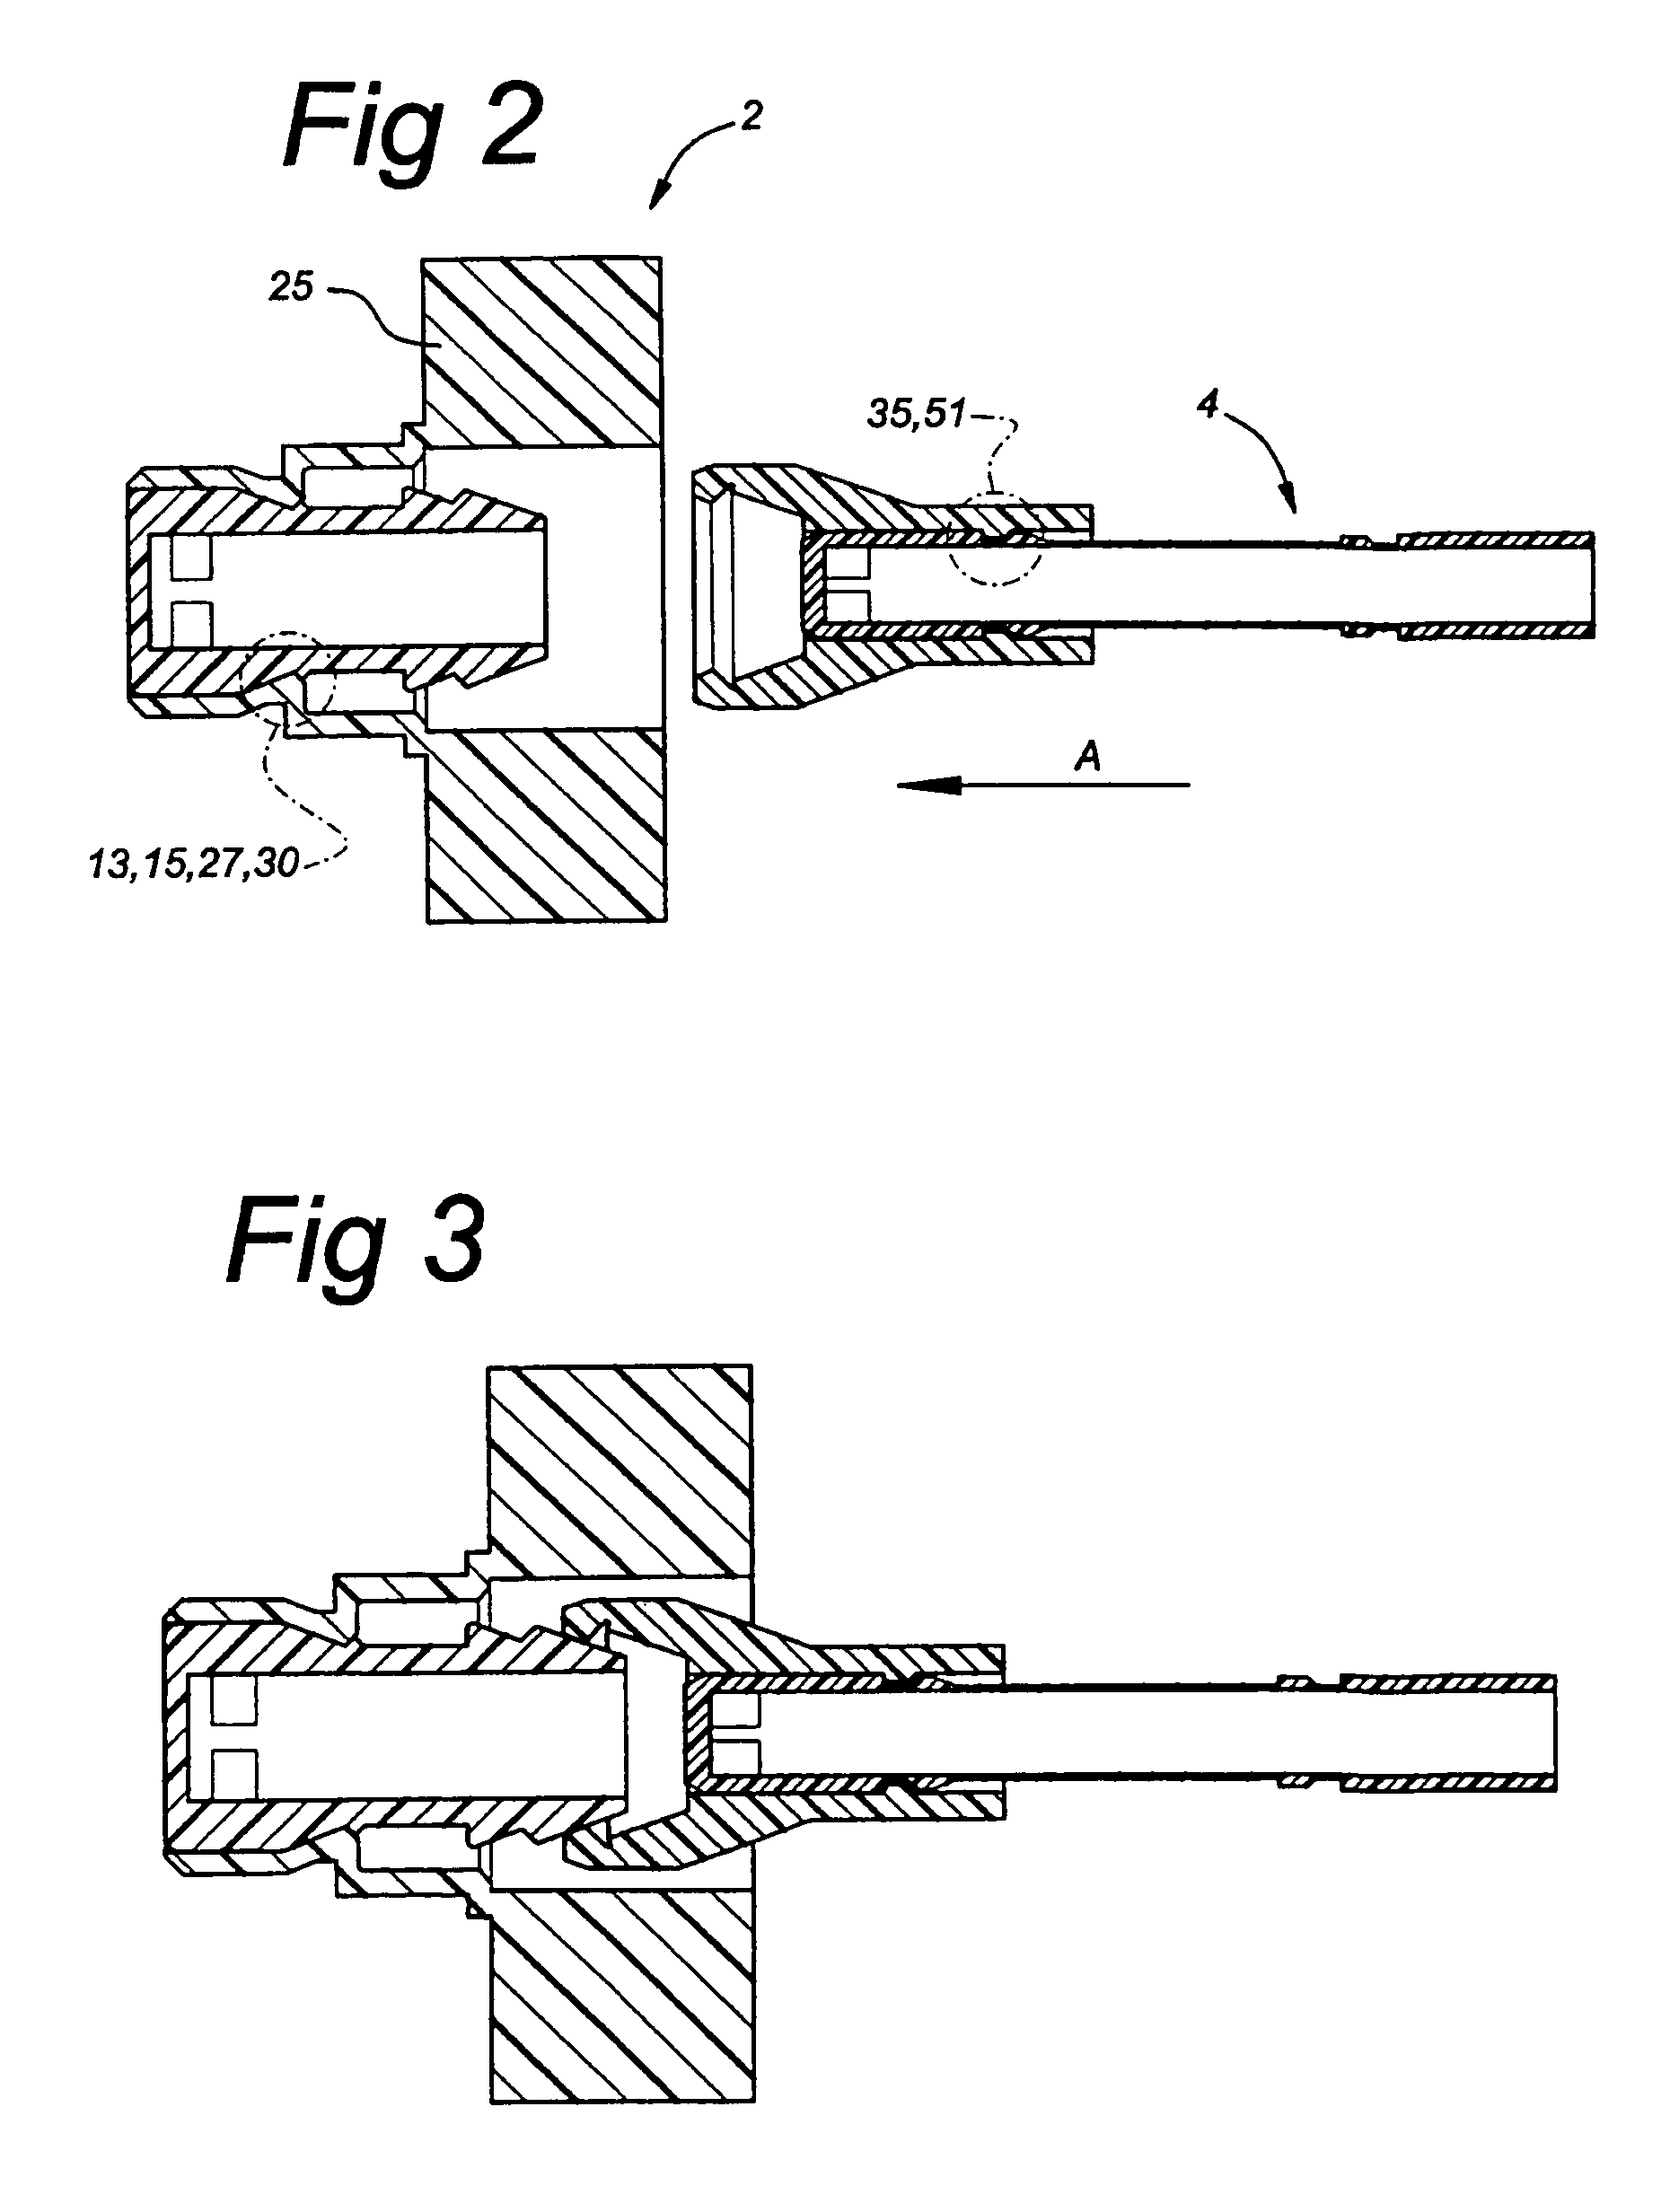 Connector assembly and method of manufacture